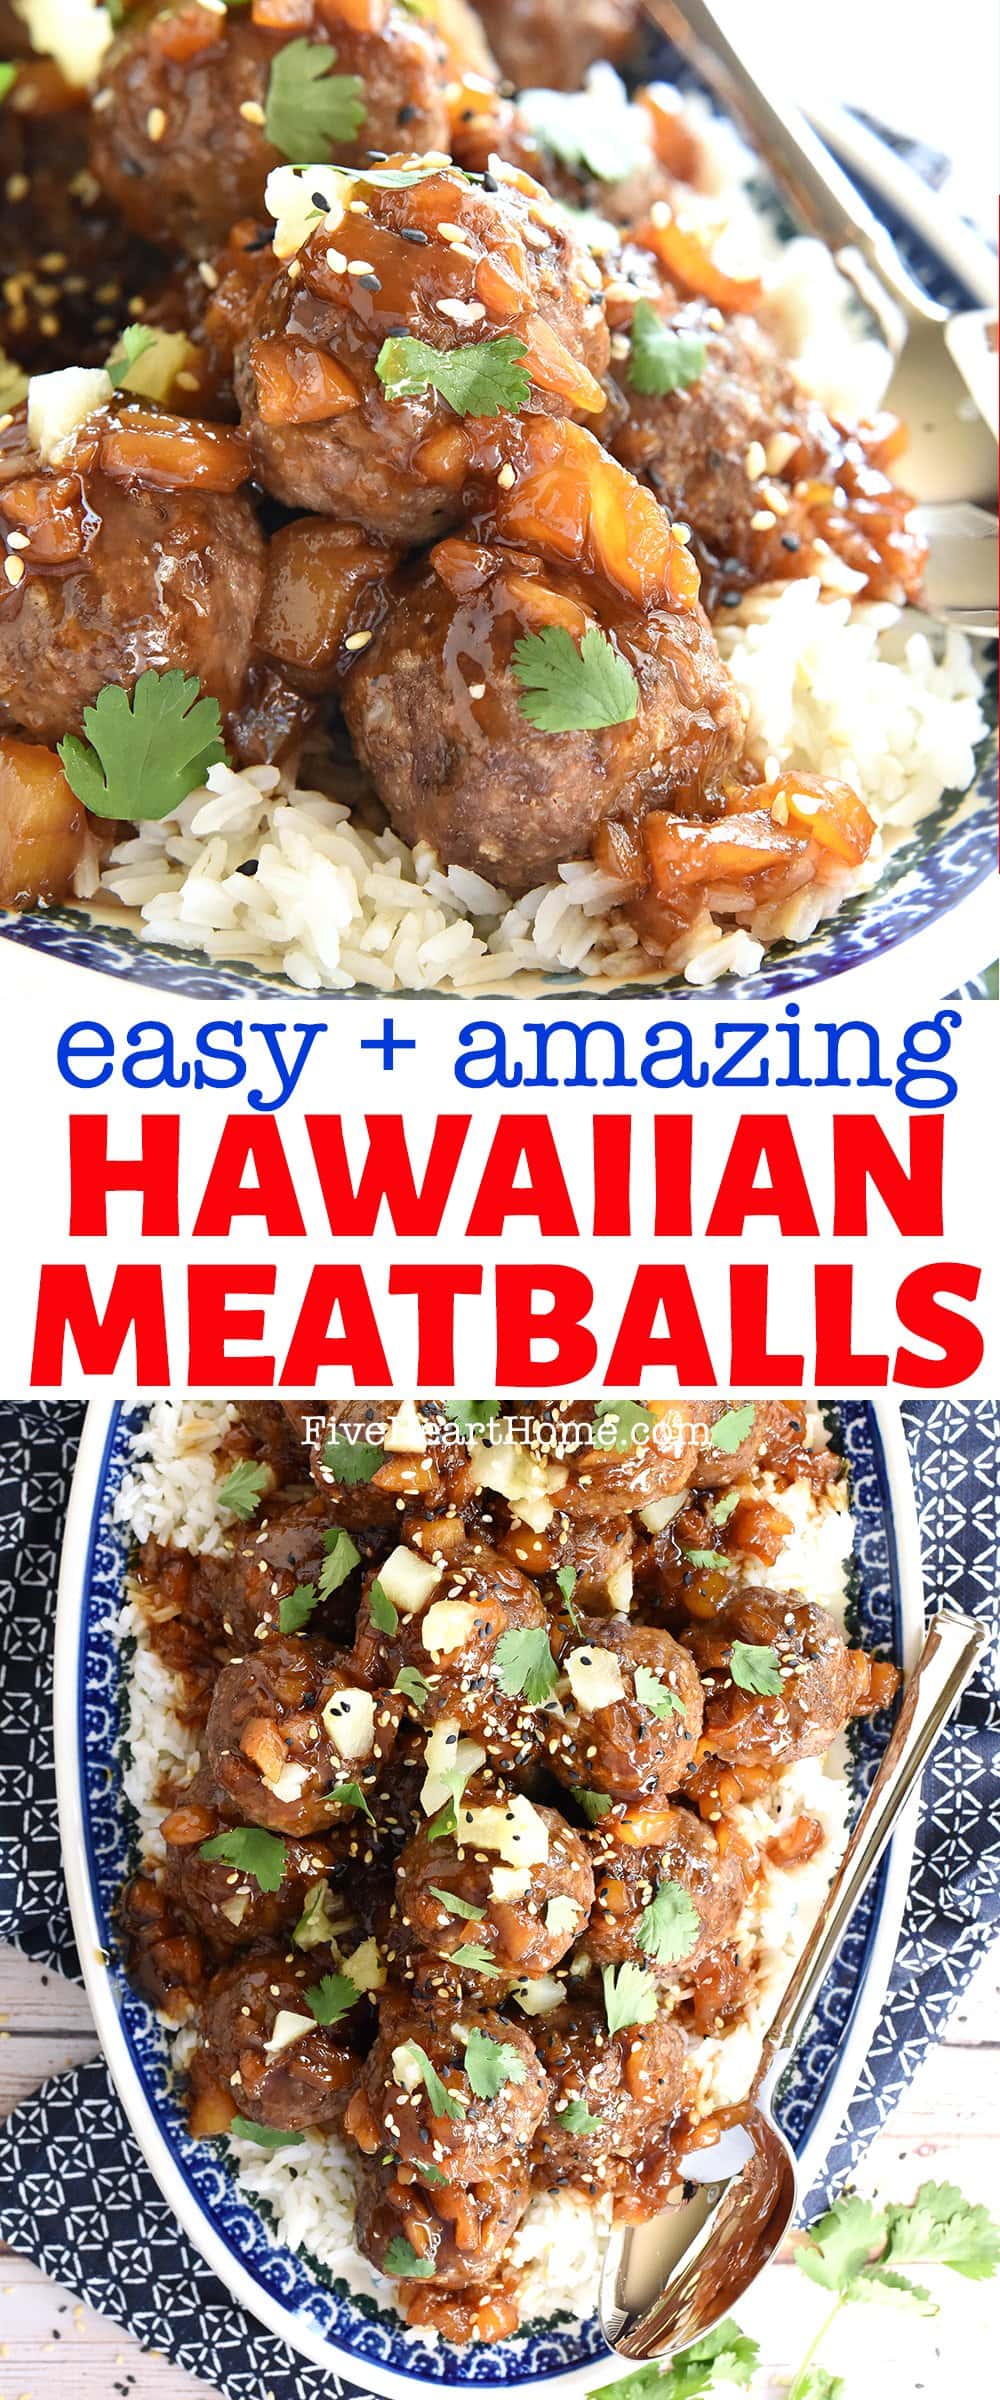 Hawaiian Meatballs ~ tender homemade meatballs smothered with a sweet and sticky, Polynesian-inspired pineapple sauce for a quick and easy dinner! | FiveHeartHome.com via @fivehearthome